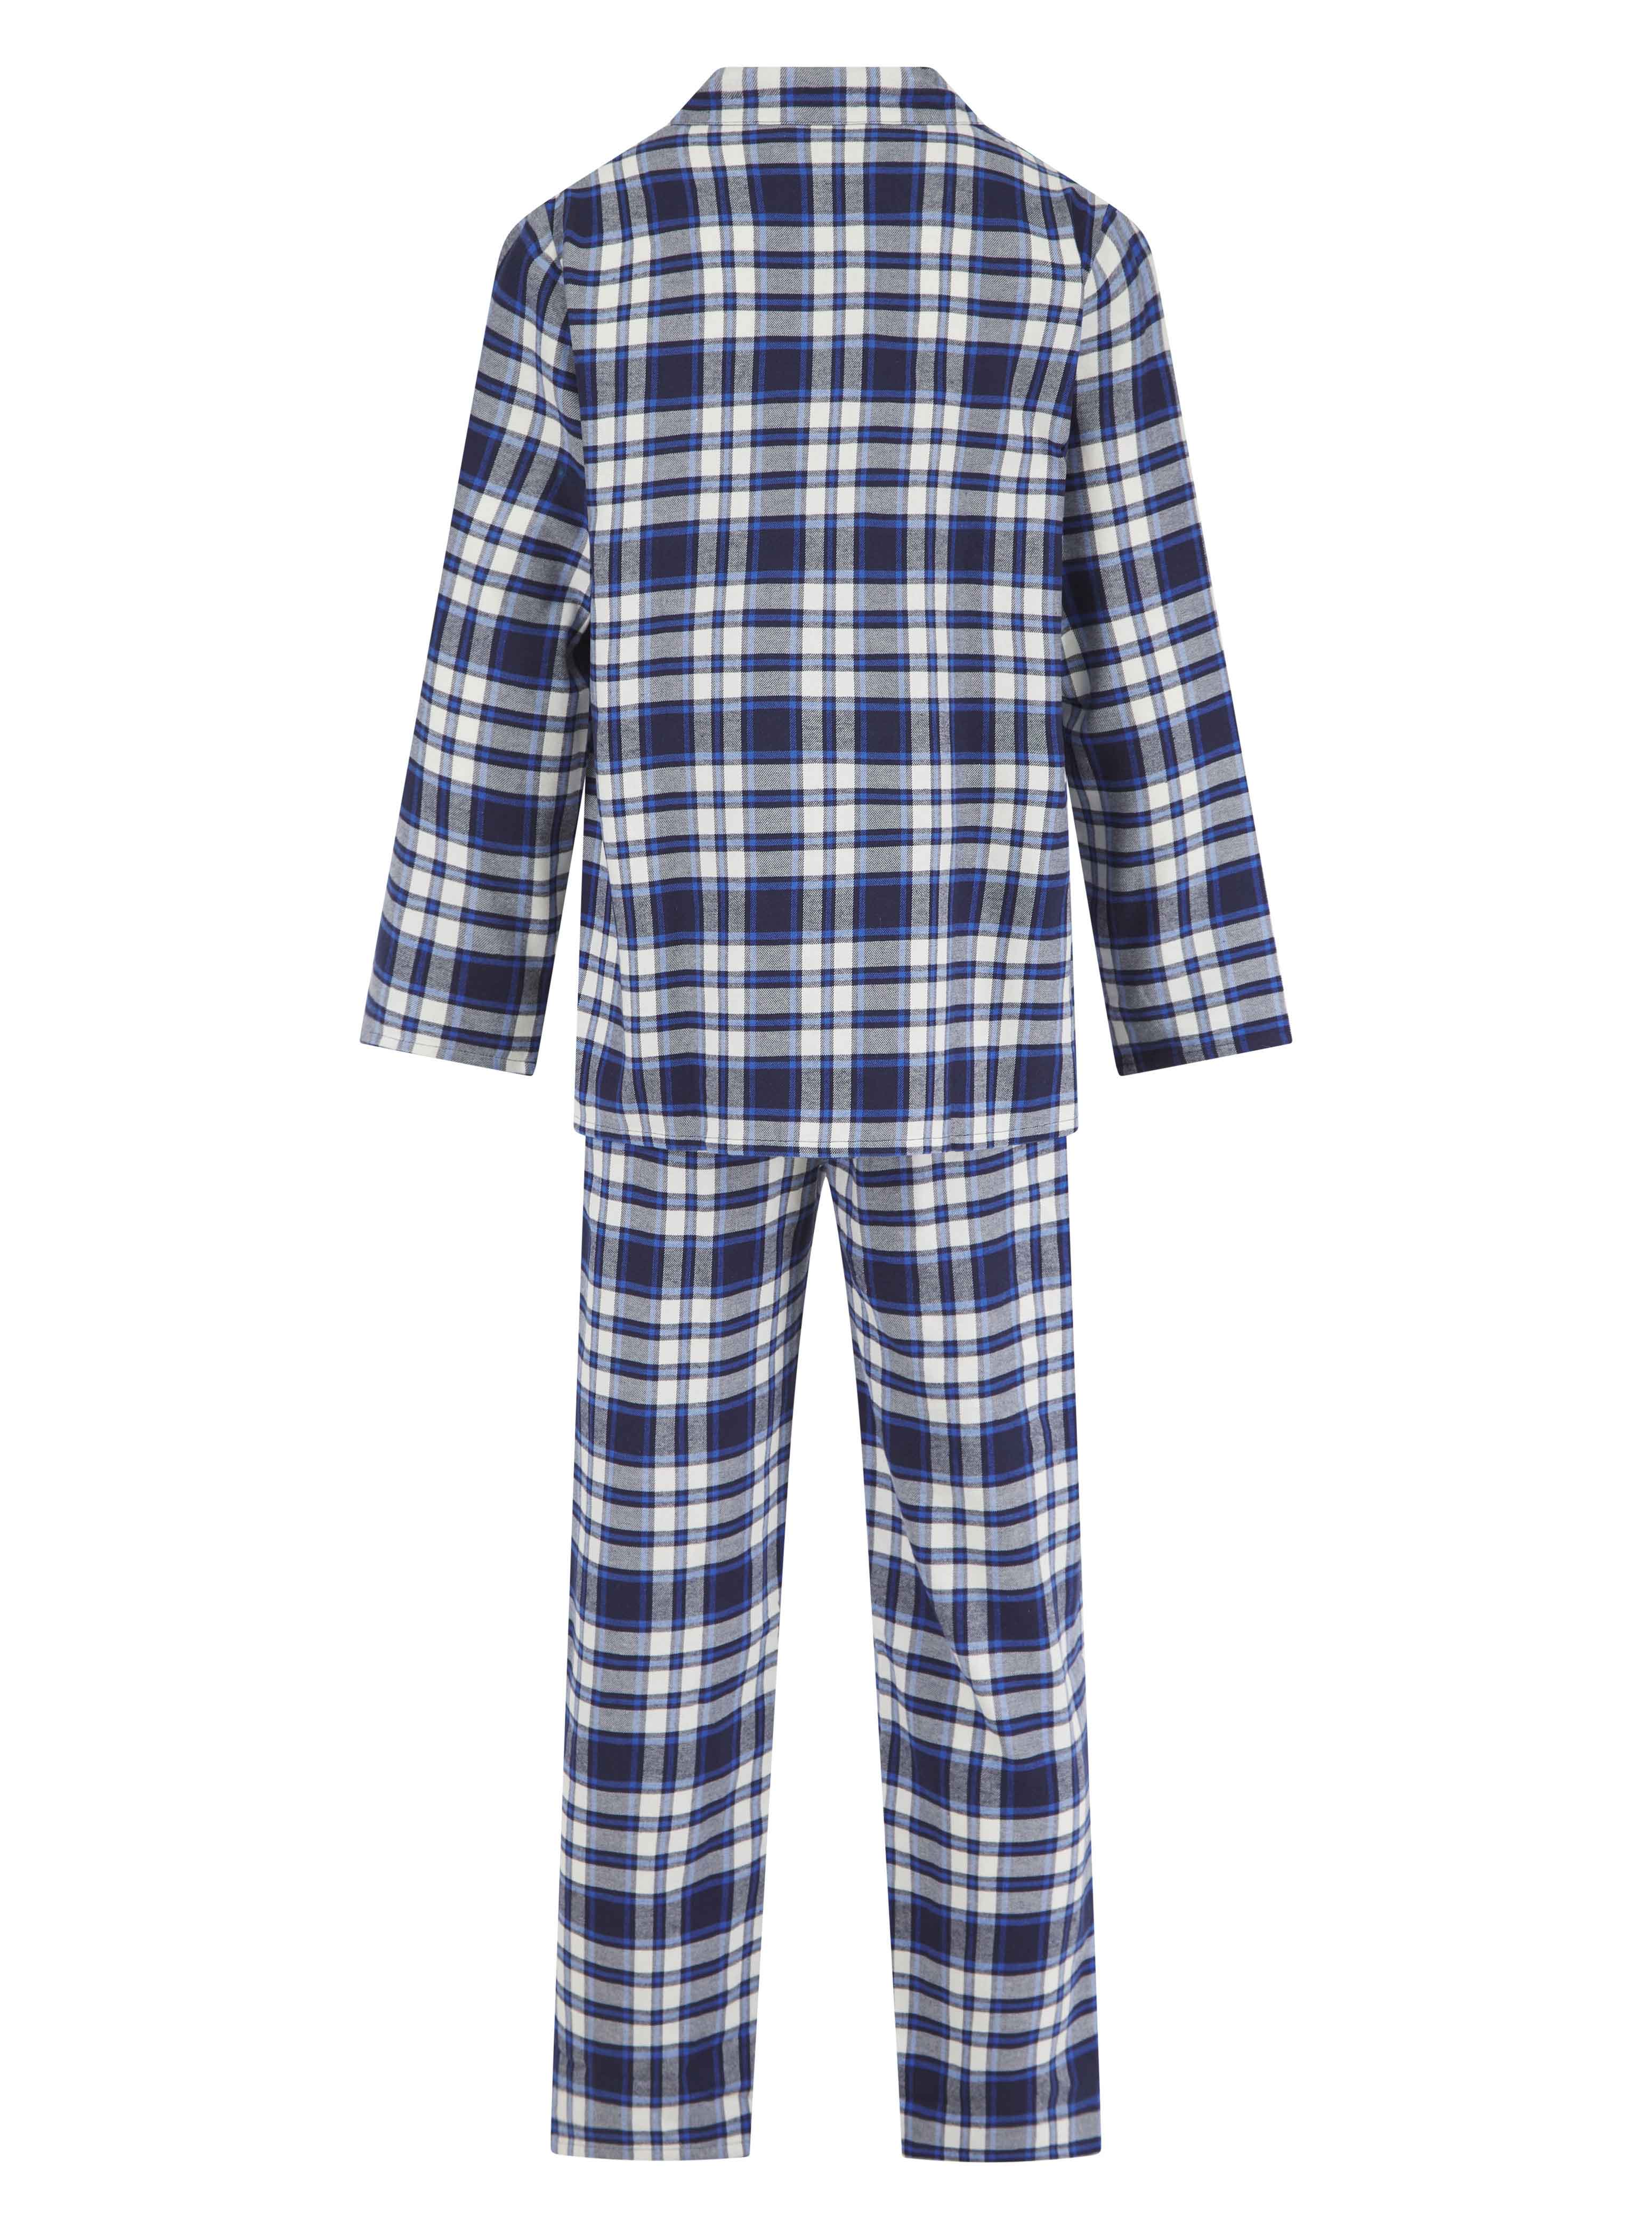 Woven Cotton Brushed Check Print Tailored Pyjama WR04811